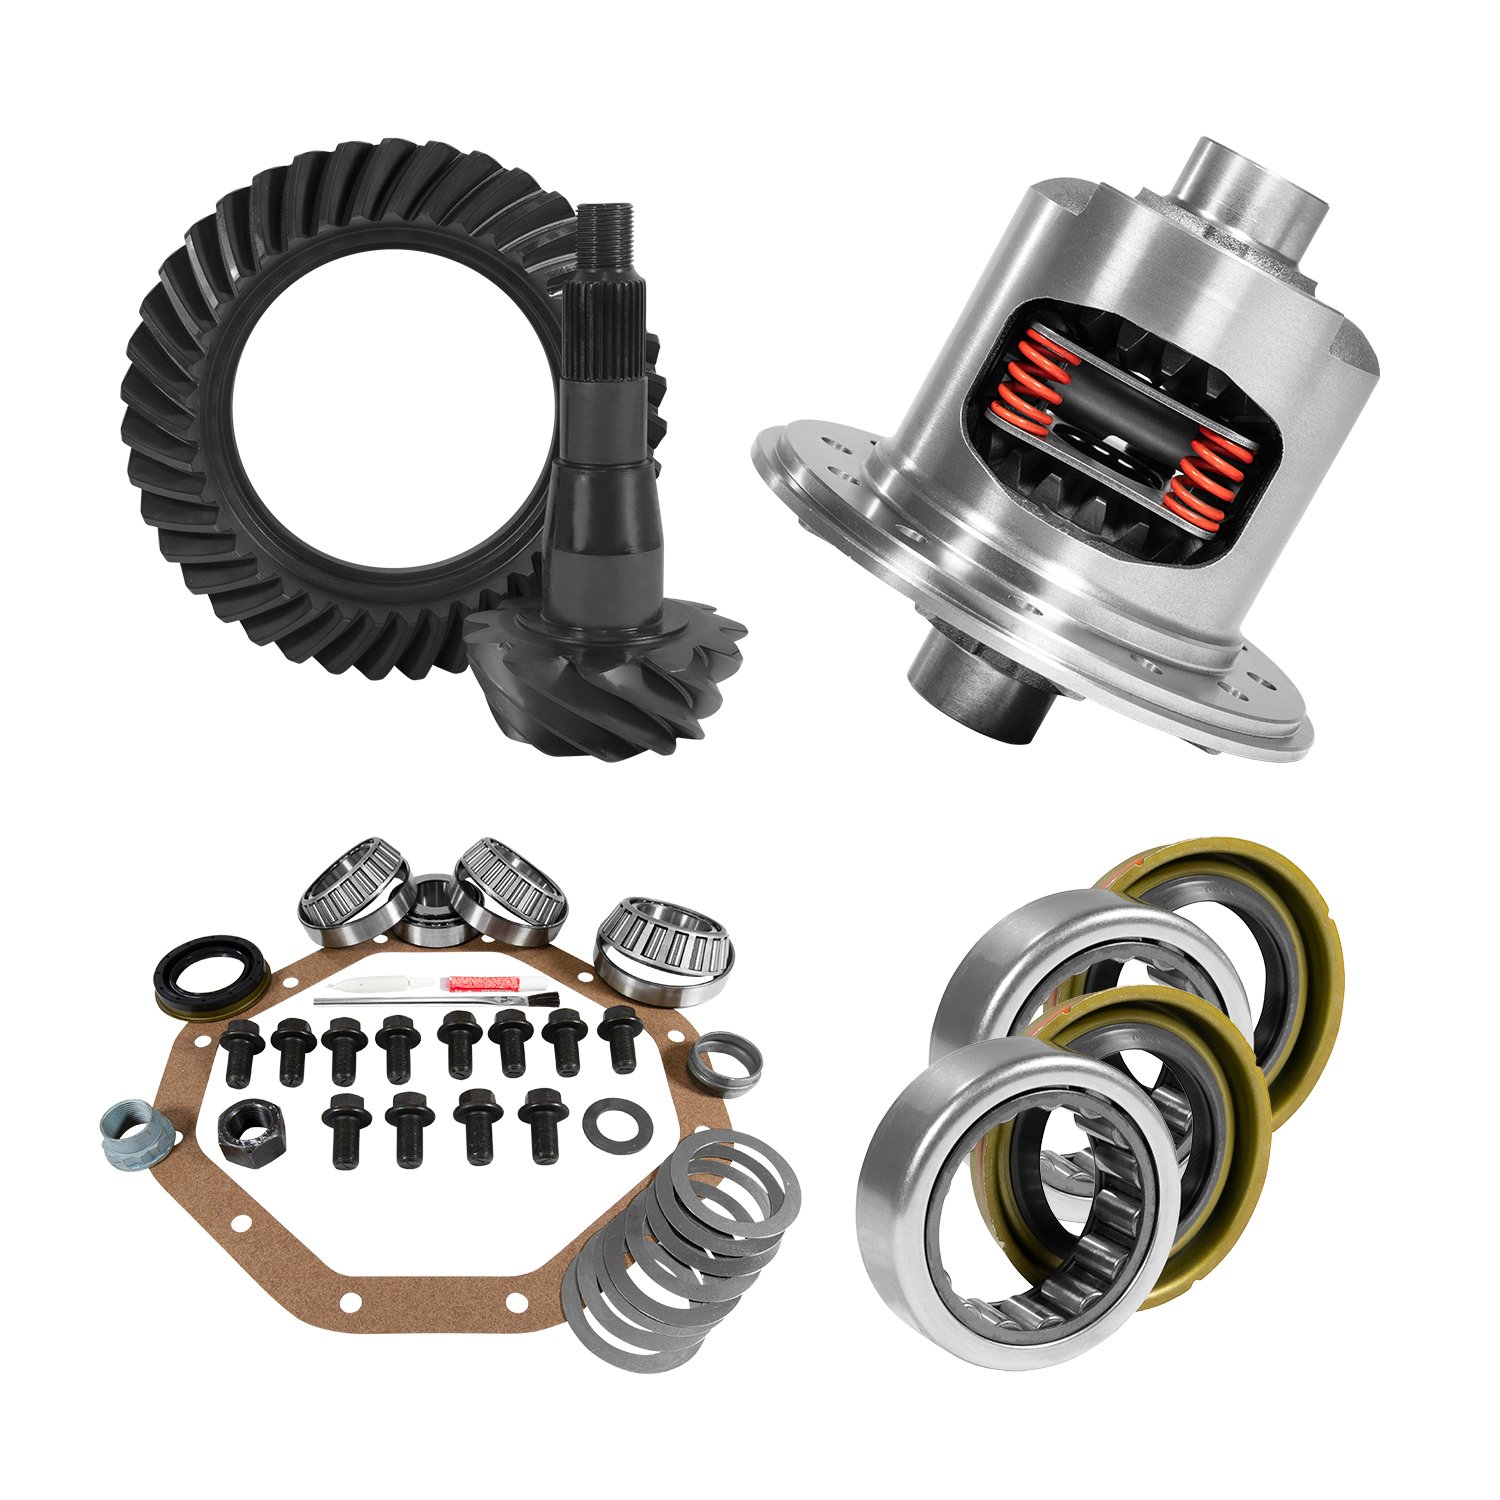 USA Standard 10796 Zf 9.25 in. Chy 3.21 Rear Ring & Pinion Install Kit, Posi, Axle Bearings & Seals